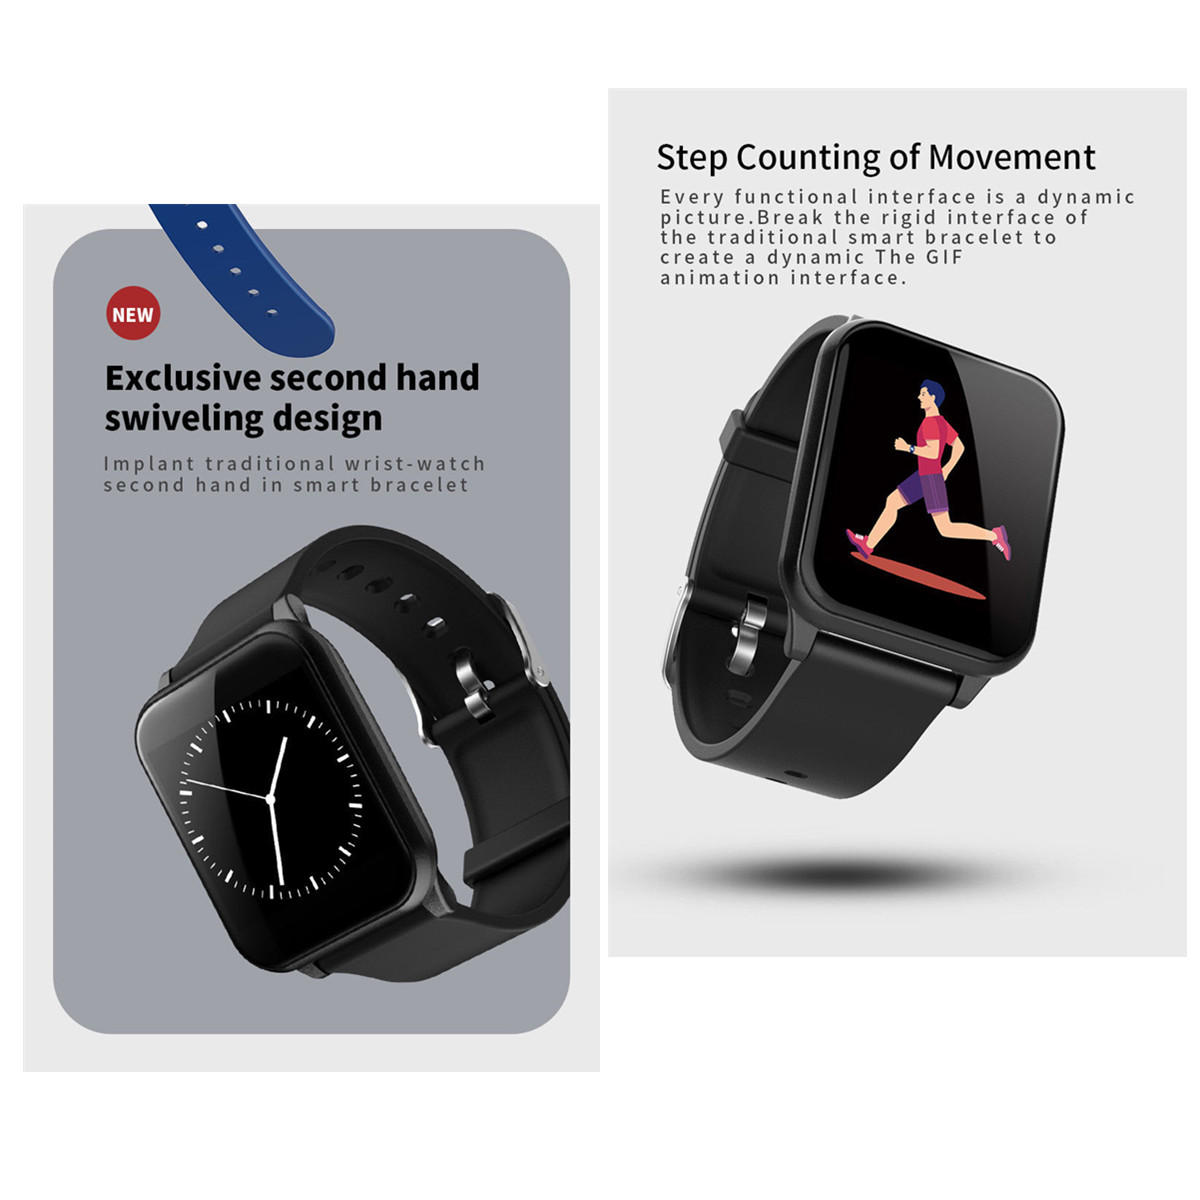 Z02 1.3 Inch IPS Display Touch Screen IP67 Waterproof Heart Rate Monitor Smart Watch Bracelet Wristband For iOS Android